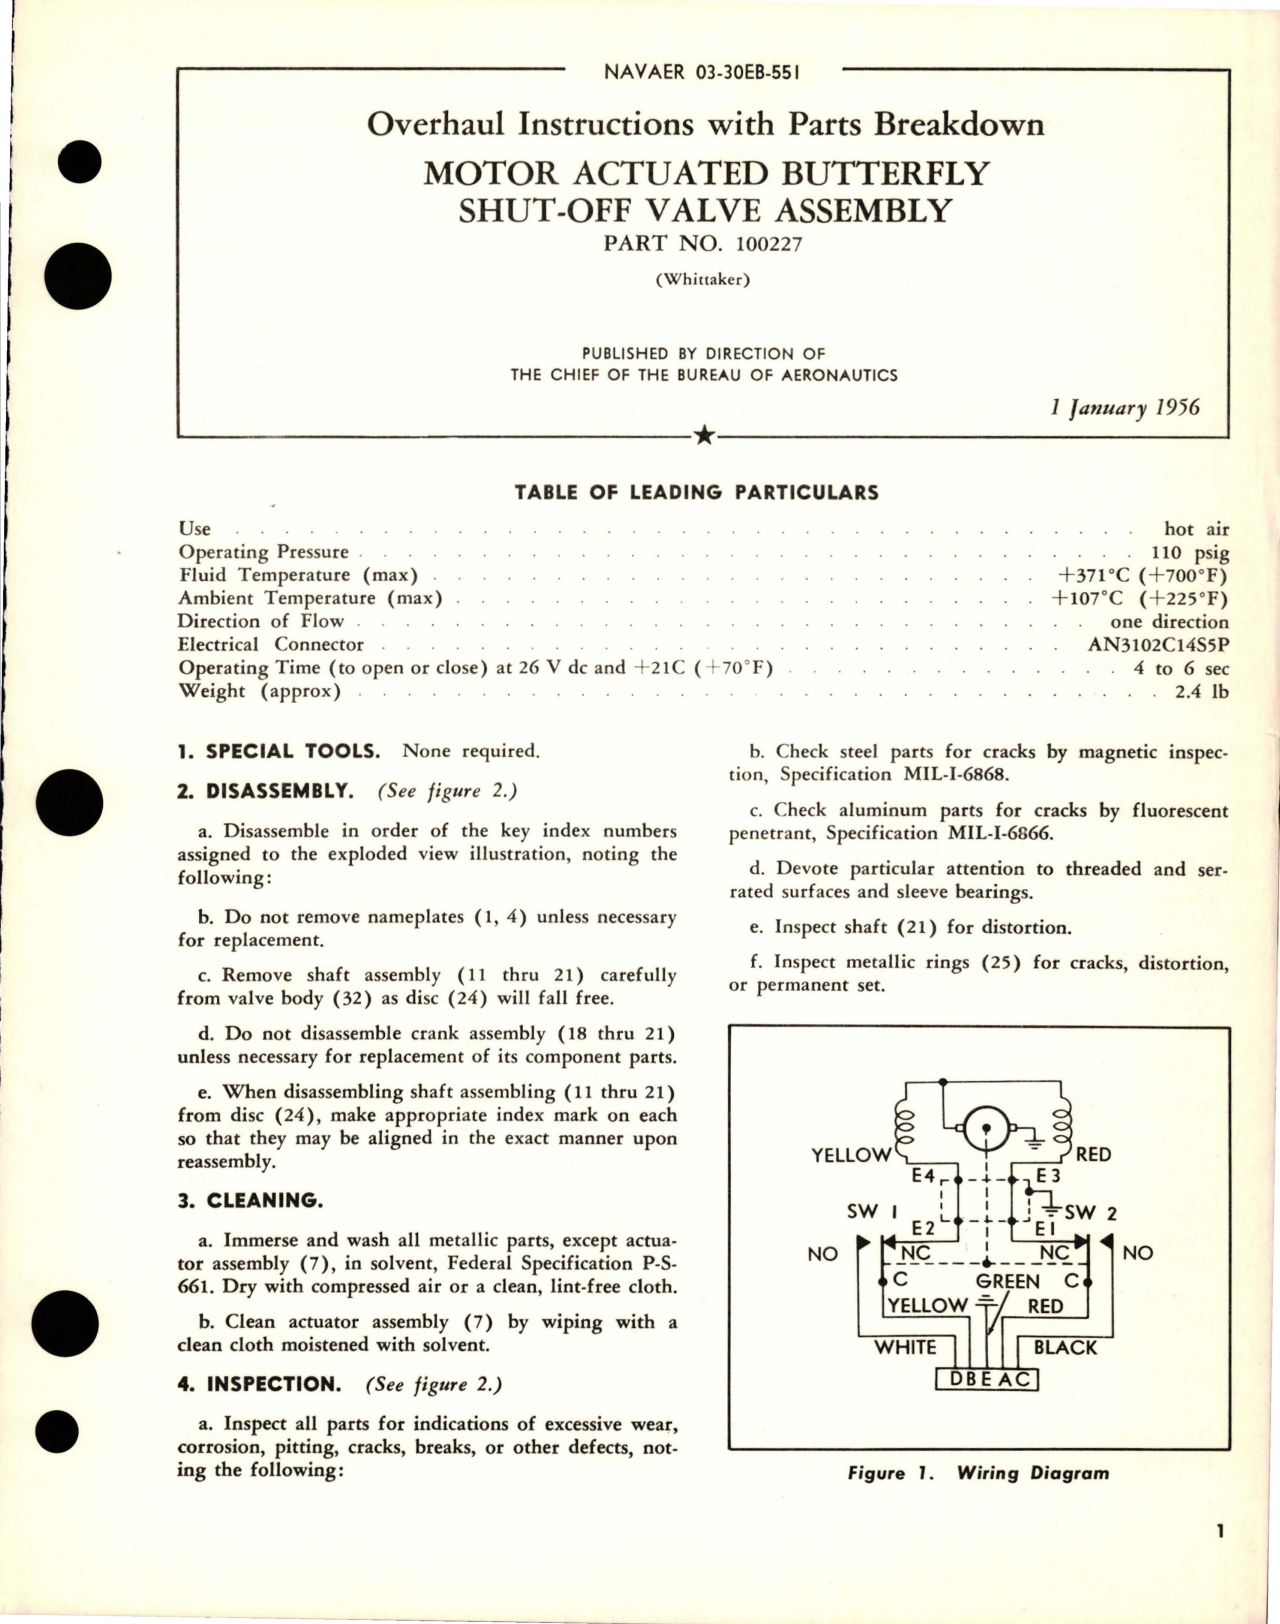 Sample page 1 from AirCorps Library document: Overhaul Instructions with Parts for Motor Actuated Butterfly Shut Off Valve Assembly - Part 100227